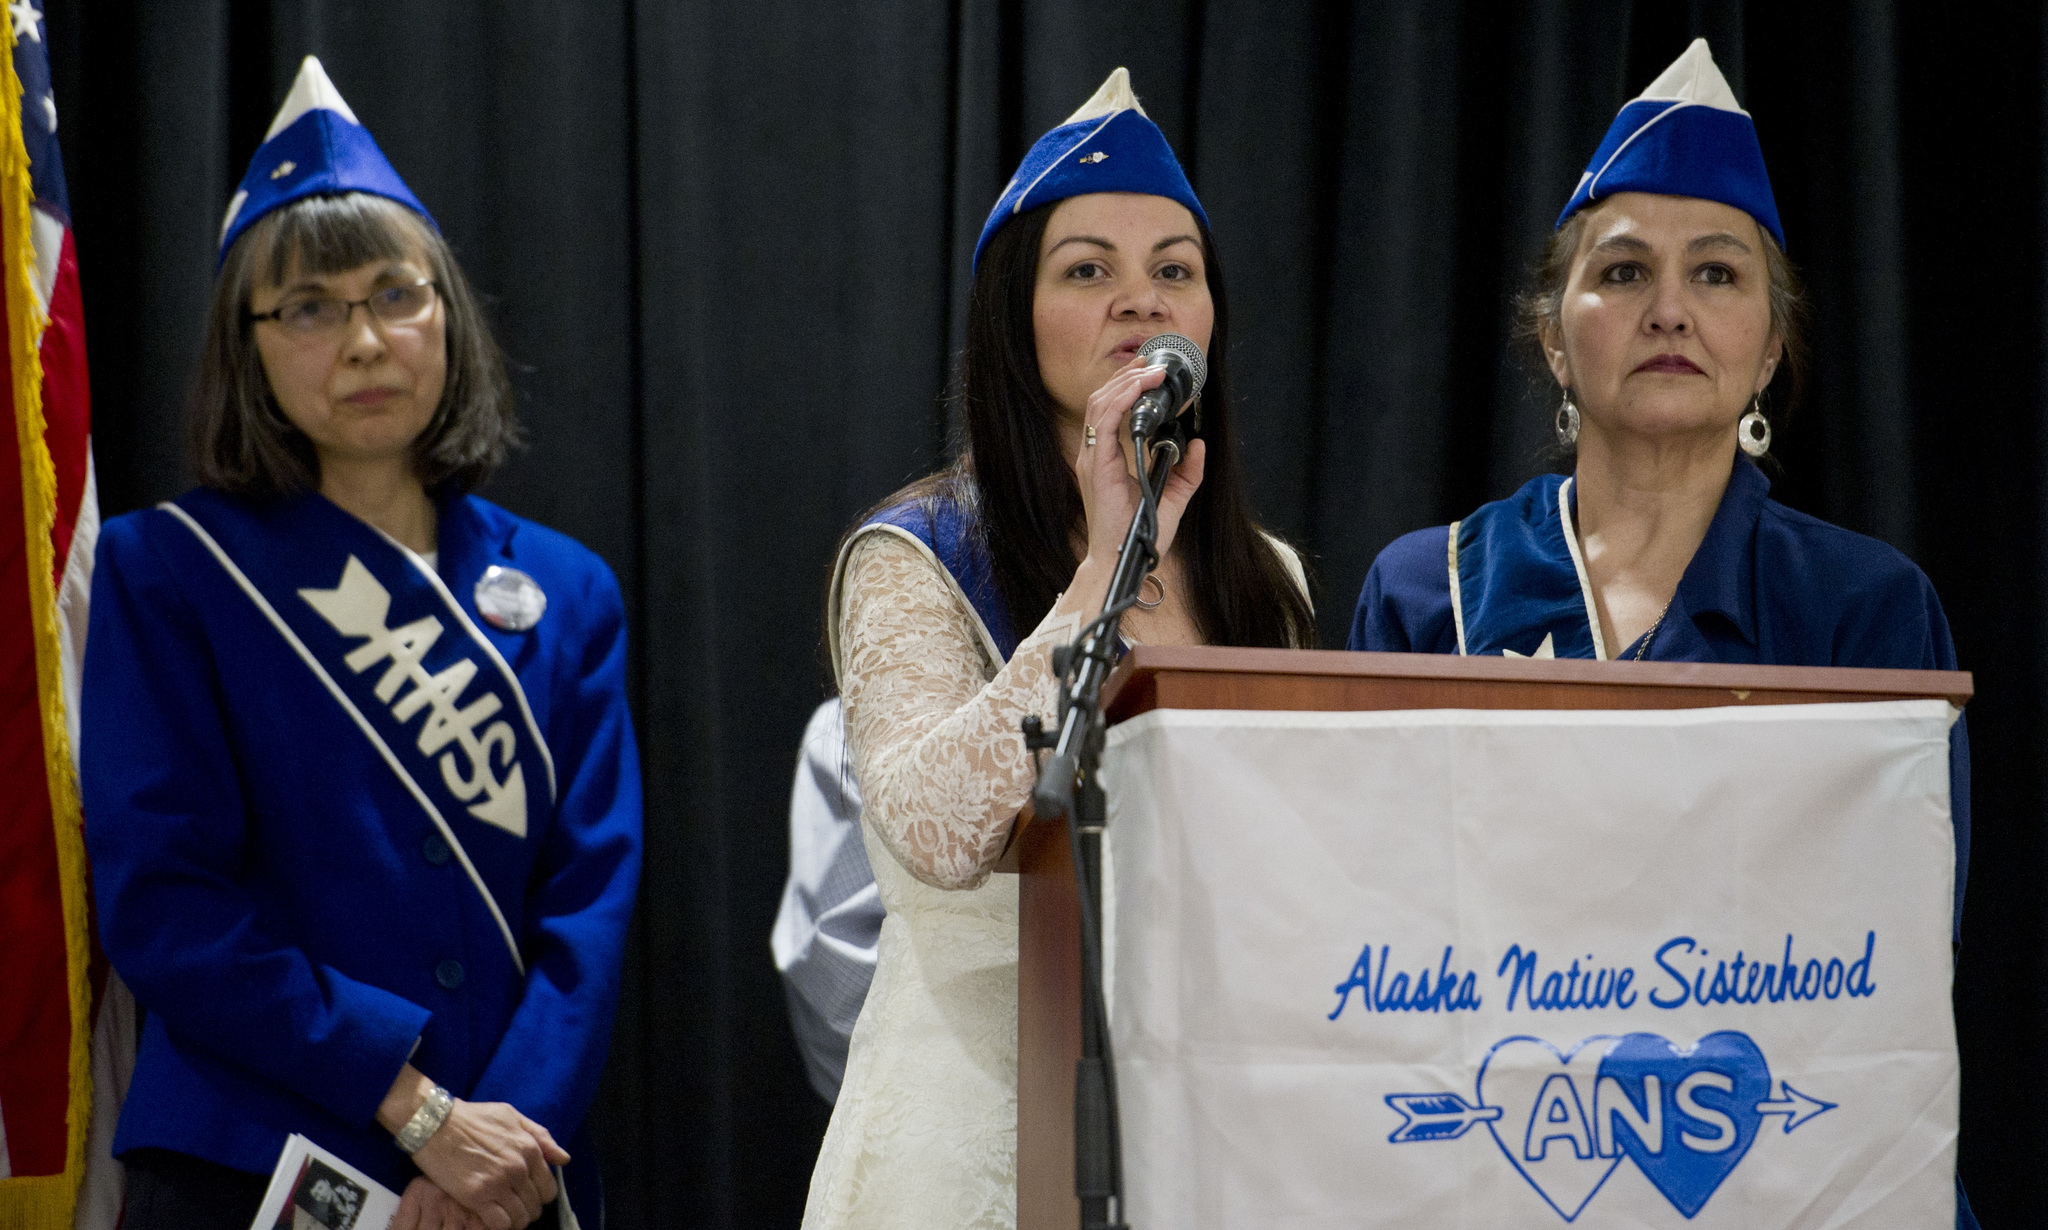 Alaska Native Sisterhood Camp 2 President Rhonda Butler, center, flanked by ANS Camp 2 Vice President Ann Chilton, right, and ANS Camp 70 Sergeant at Arms Lillian Petershoare, welcomes about 150 people to the Elizabeth Peratrovich Day ceremony in the Elizabeth Peratrovich Hall on Thursday. (Michael Penn | Juneau Empire)